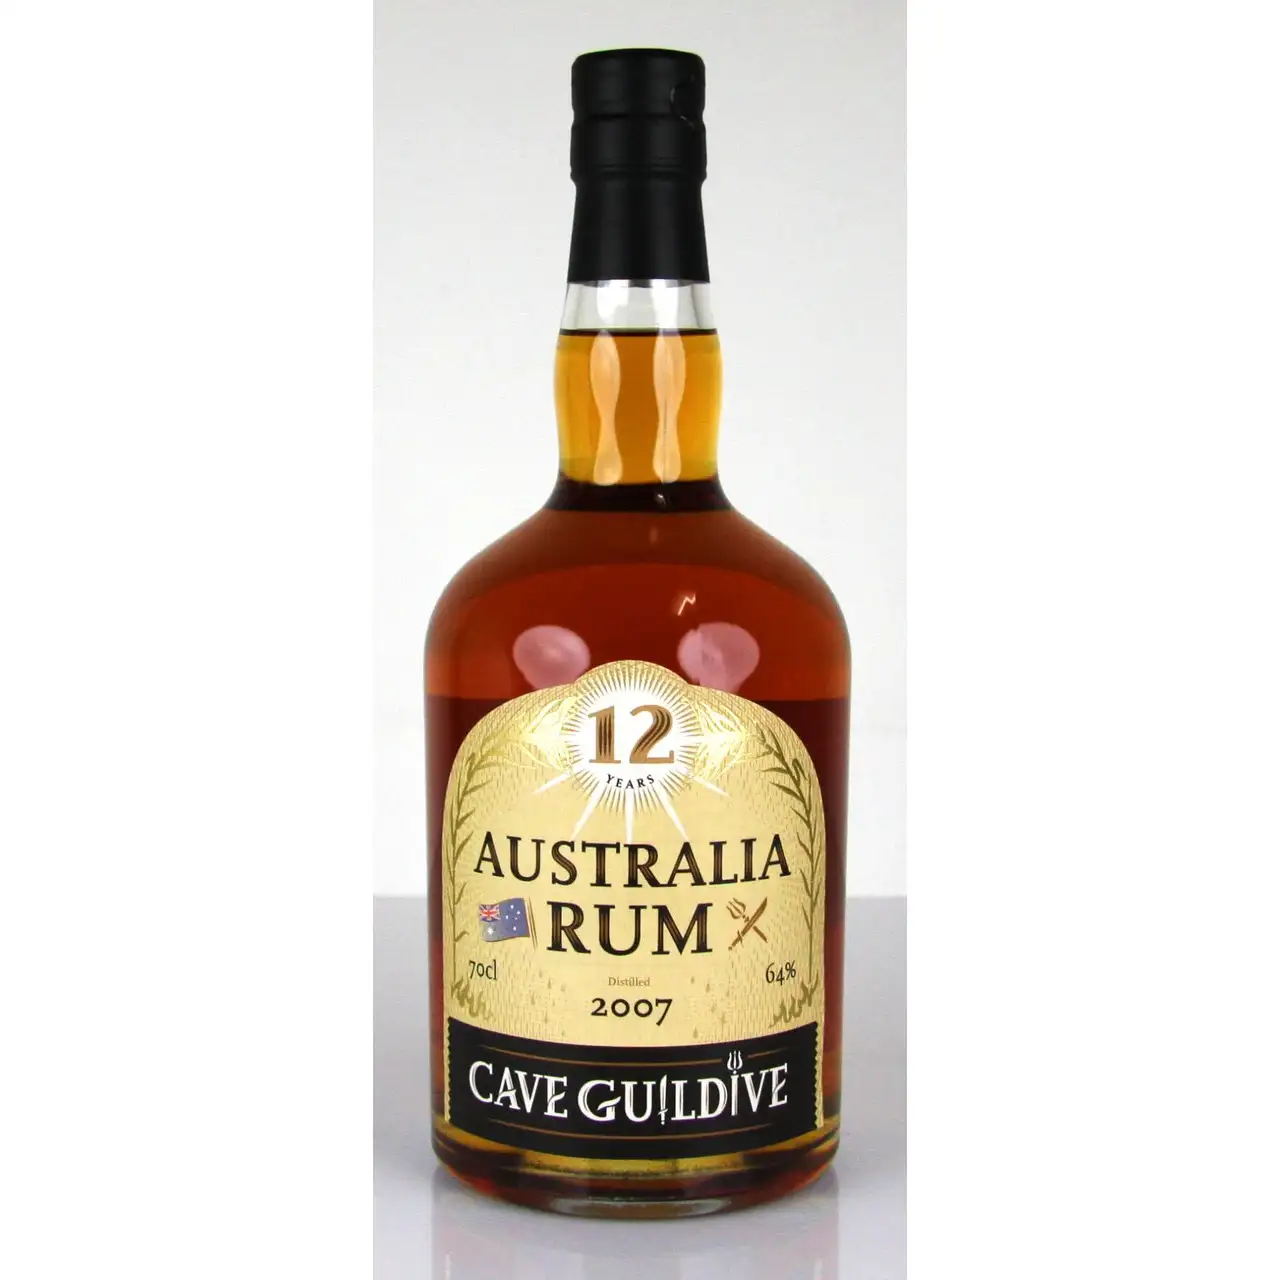 Image of the front of the bottle of the rum Australia Rum